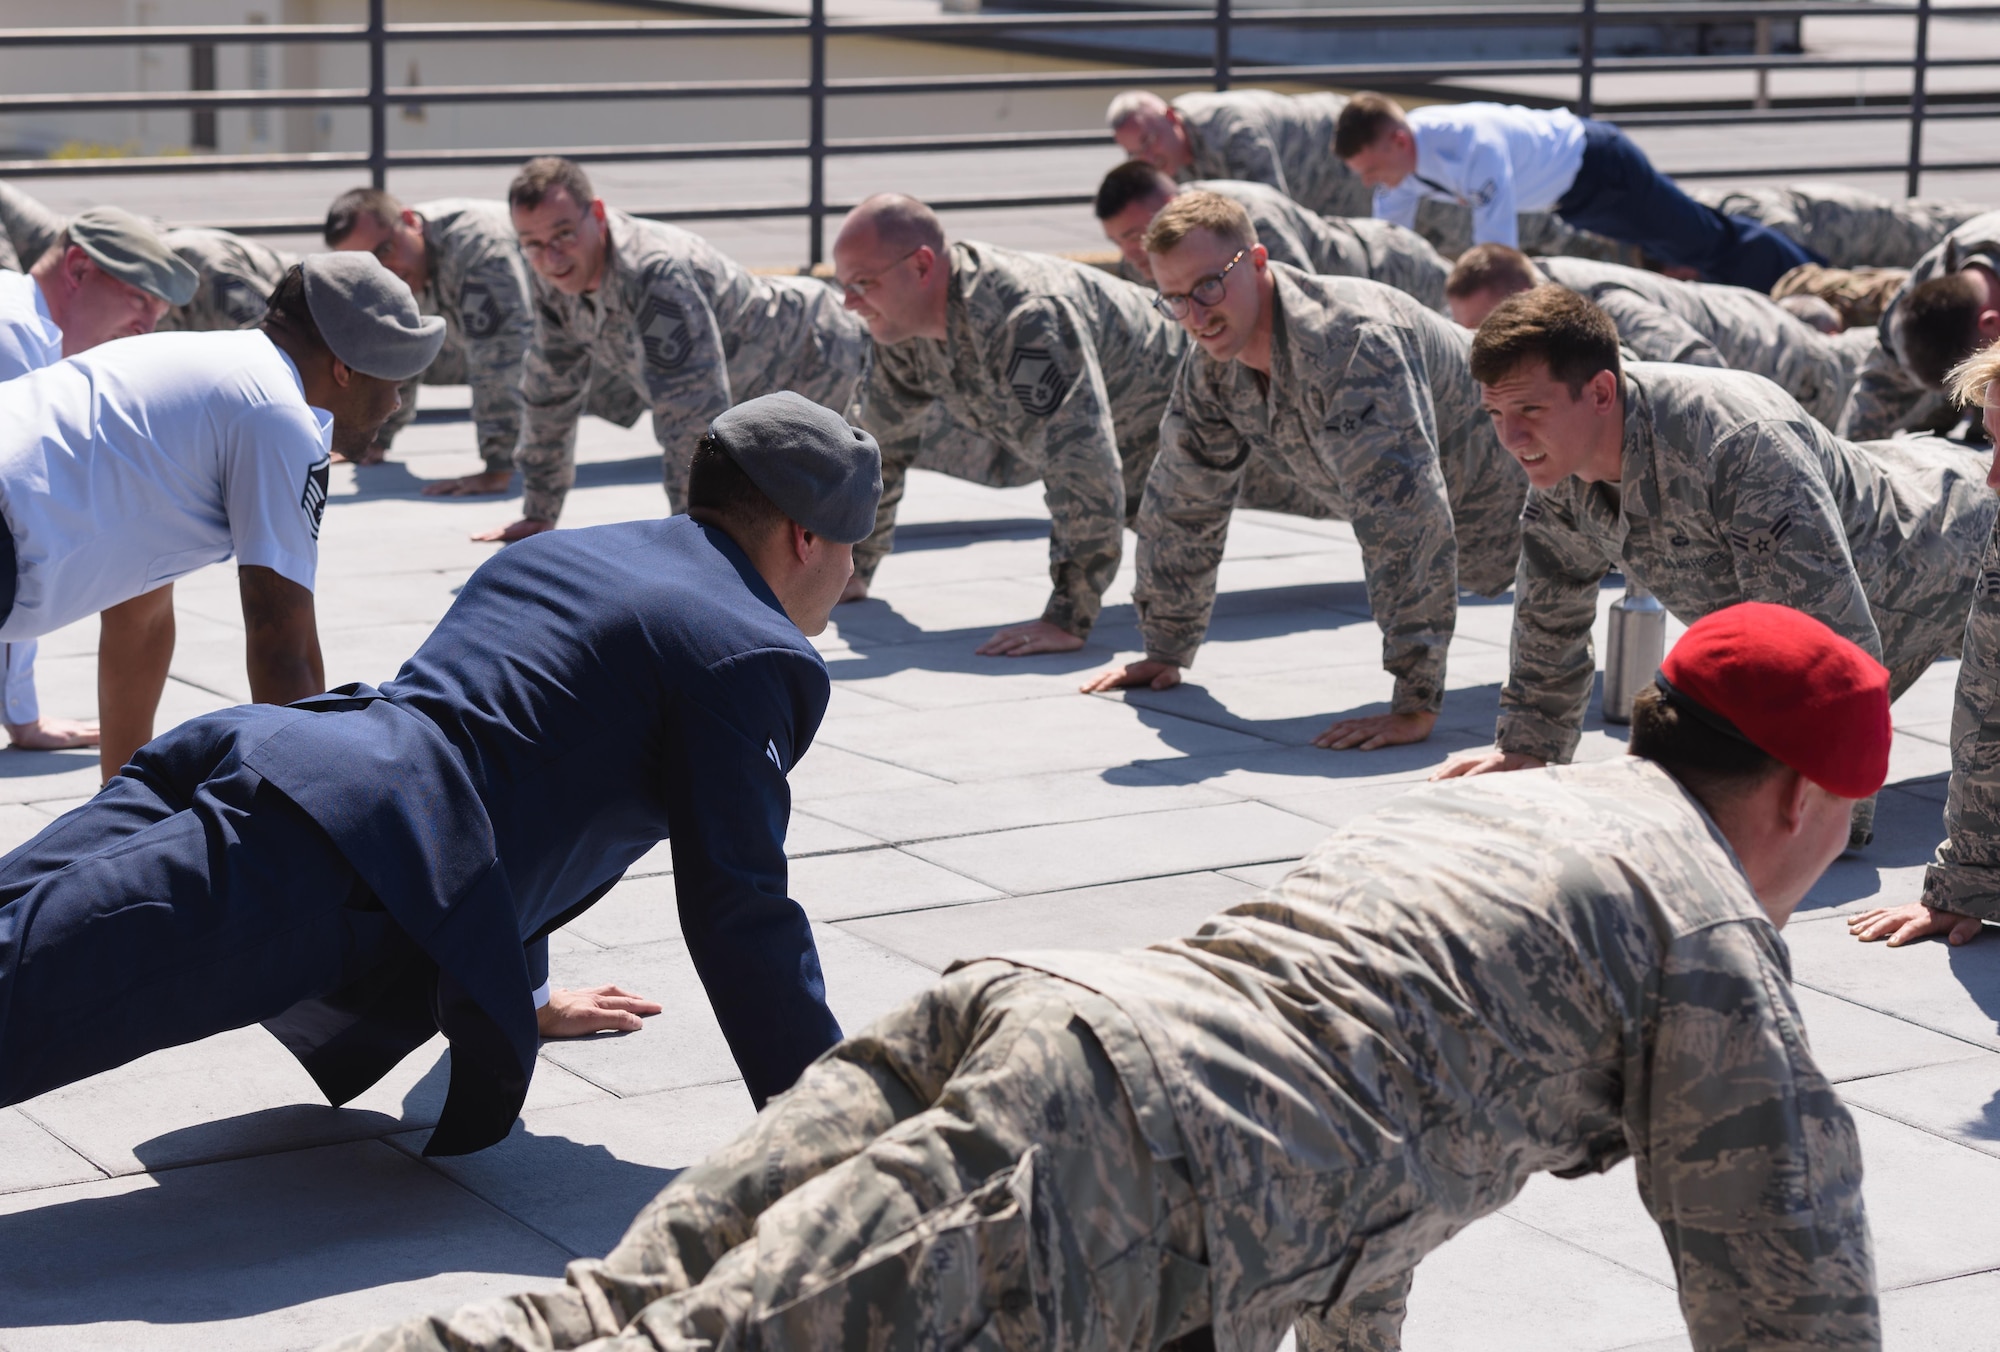 Senior Airman Matthew James, 335th Training Squadron student, leads graduates and guest in Memorial Pushups after receiving his Gray Beret during a Special Operations Weather Apprentice Course graduation ceremony at the Weather Training Complex, March 22, 2017, on Keesler Air Force Base, Miss. At his graduation James received his Gray Beret. (U.S. Air Force photo by Andre’ Askew)